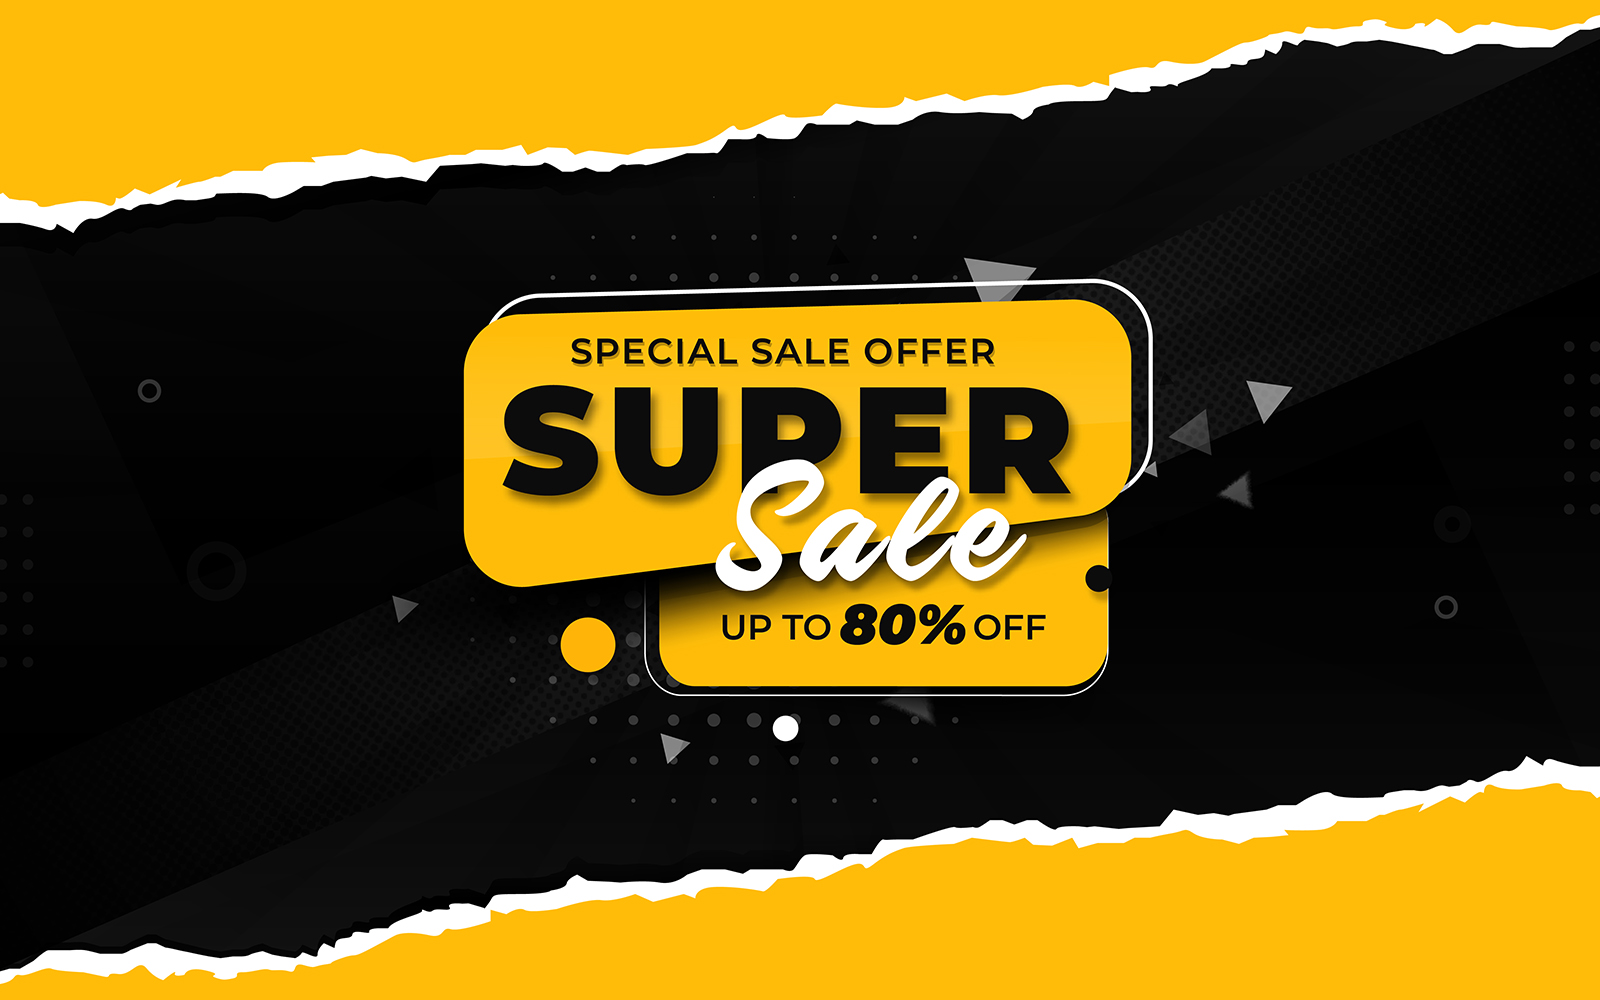 Super Realistic Sale Yellows and Dark Premium Ripped Paper Background Design Universal Vector